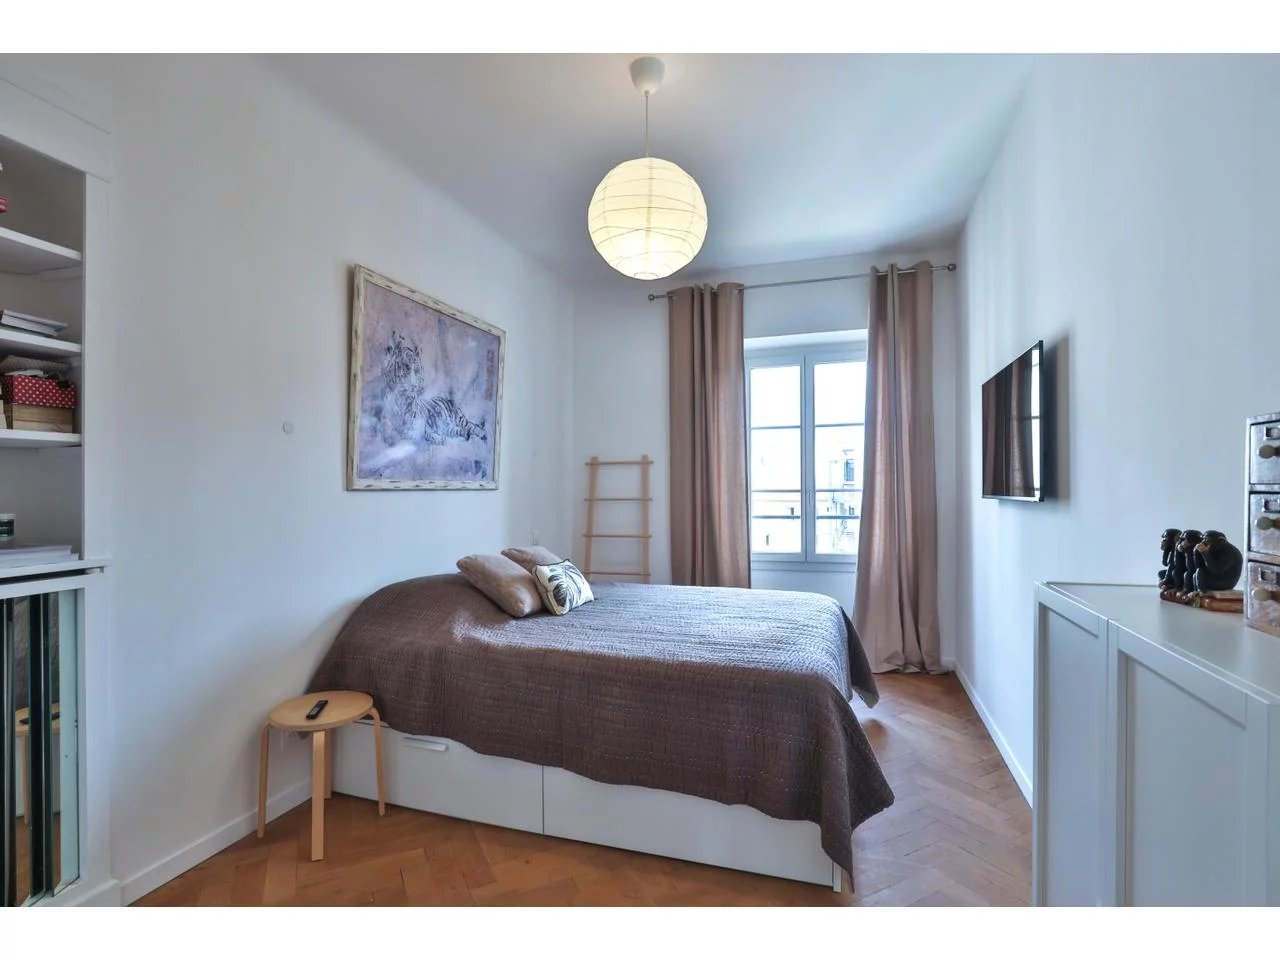 Appartement  4 Rooms 105.16m2  for sale   997 500 €